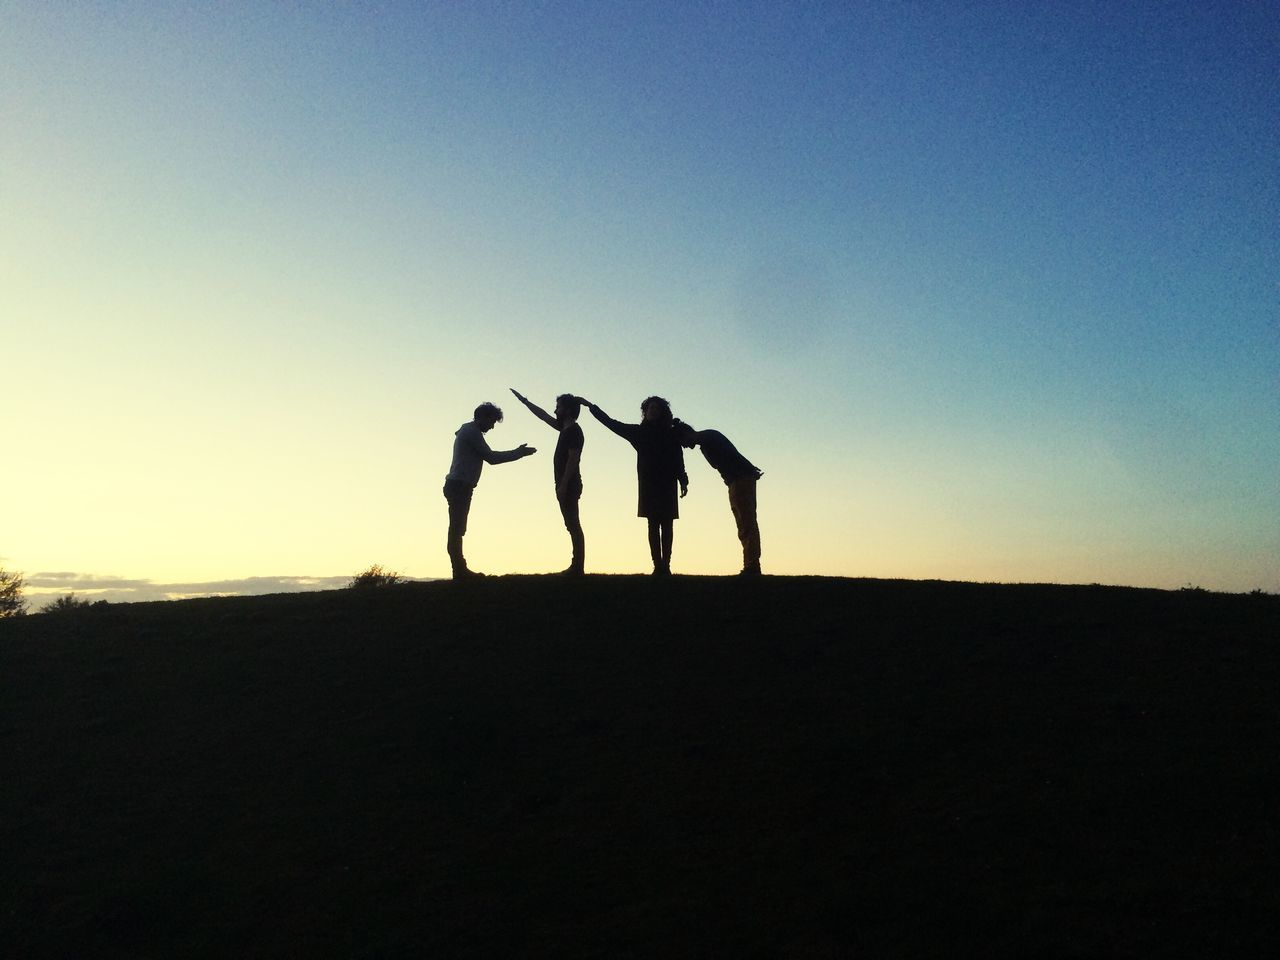 silhouette, togetherness, leisure activity, men, lifestyles, copy space, clear sky, friendship, bonding, sunset, full length, person, standing, love, nature, landscape, outline